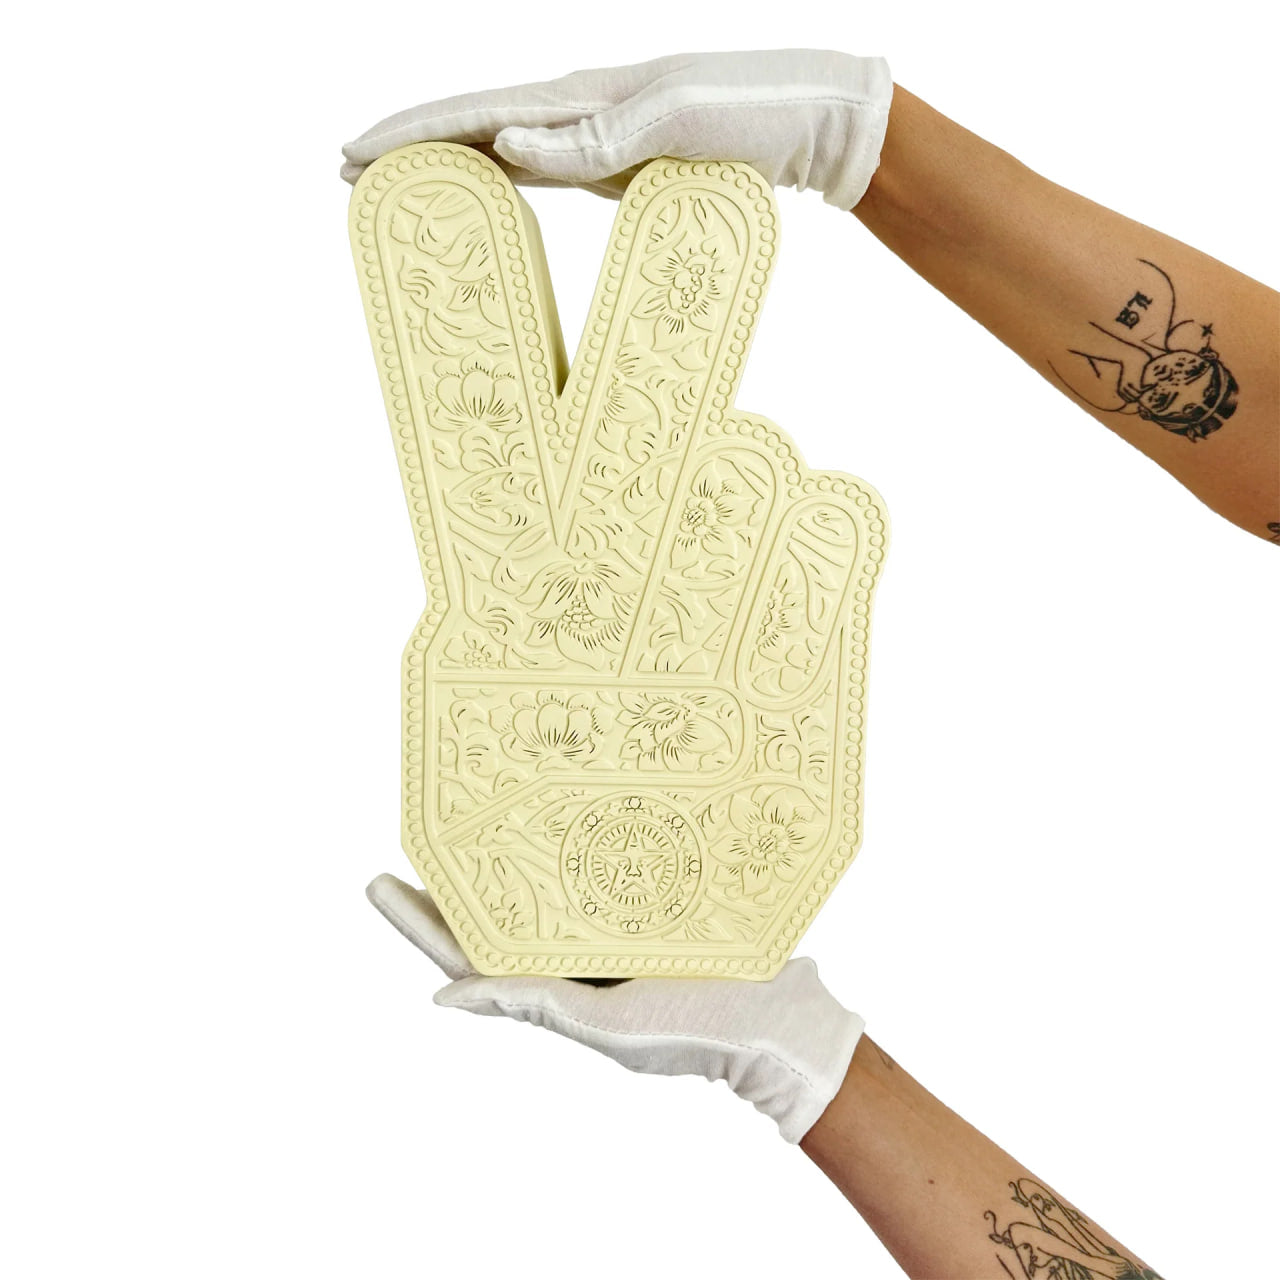 OBEY (Shepard Fairey) - Peace Fingers sculpture – Hedonism Gallery